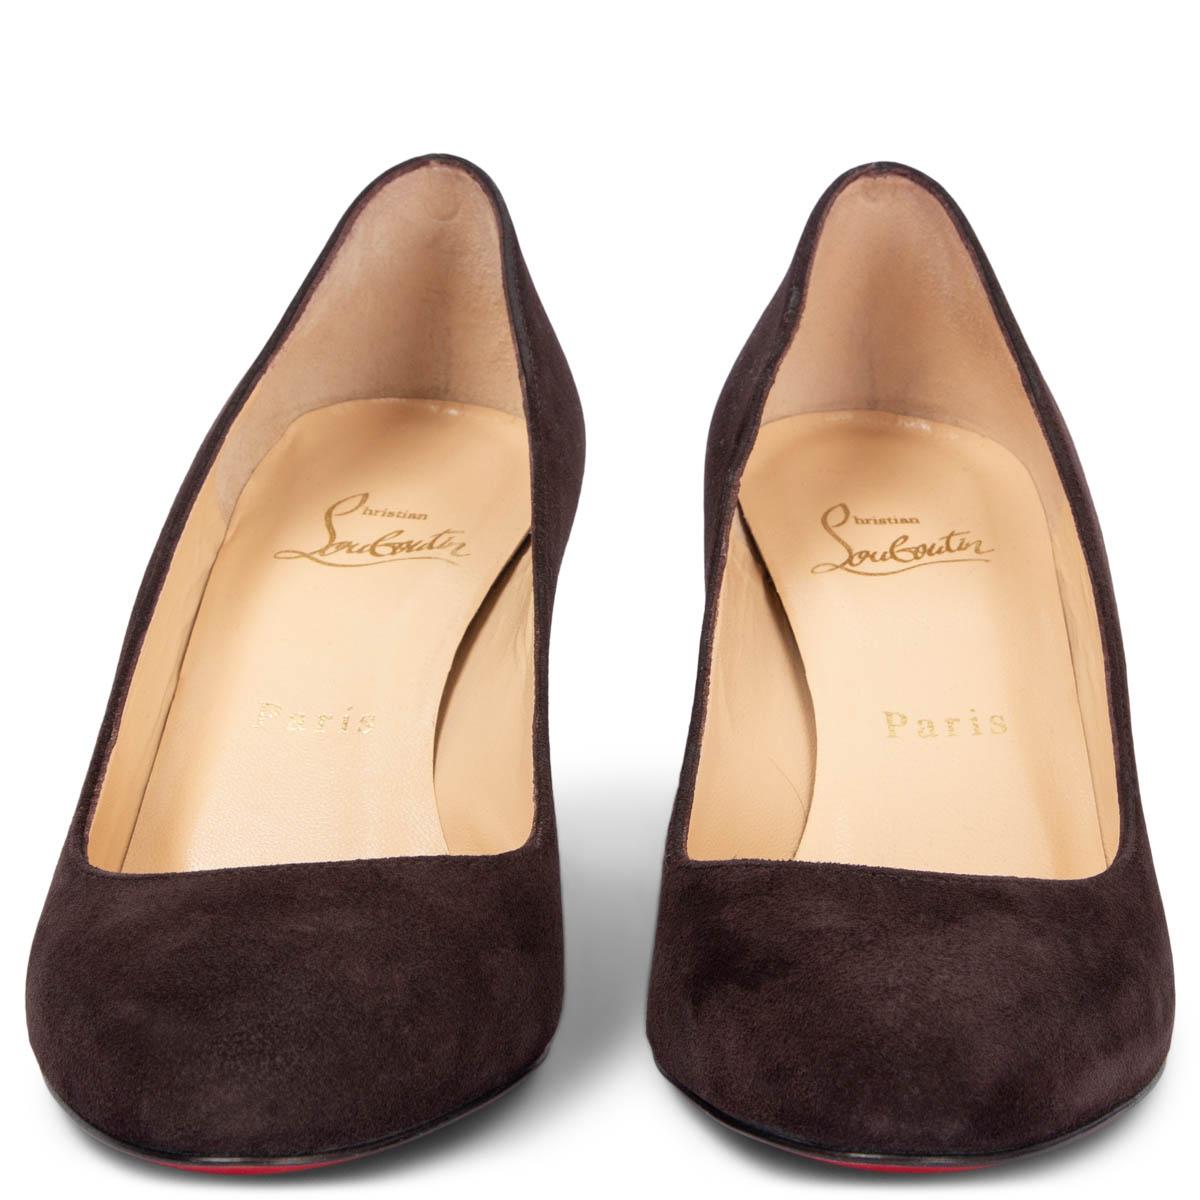 100% authentic Christian Louboutin round-toe pumps in espresso brown suede leather. Have been worn once and are in virtually new condition. 

Measurements
Imprinted Size	36.5
Shoe Size	36.5
Inside Sole	23.5cm (9.2in)
Width	7.5cm (2.9in)
Heel	6.5cm